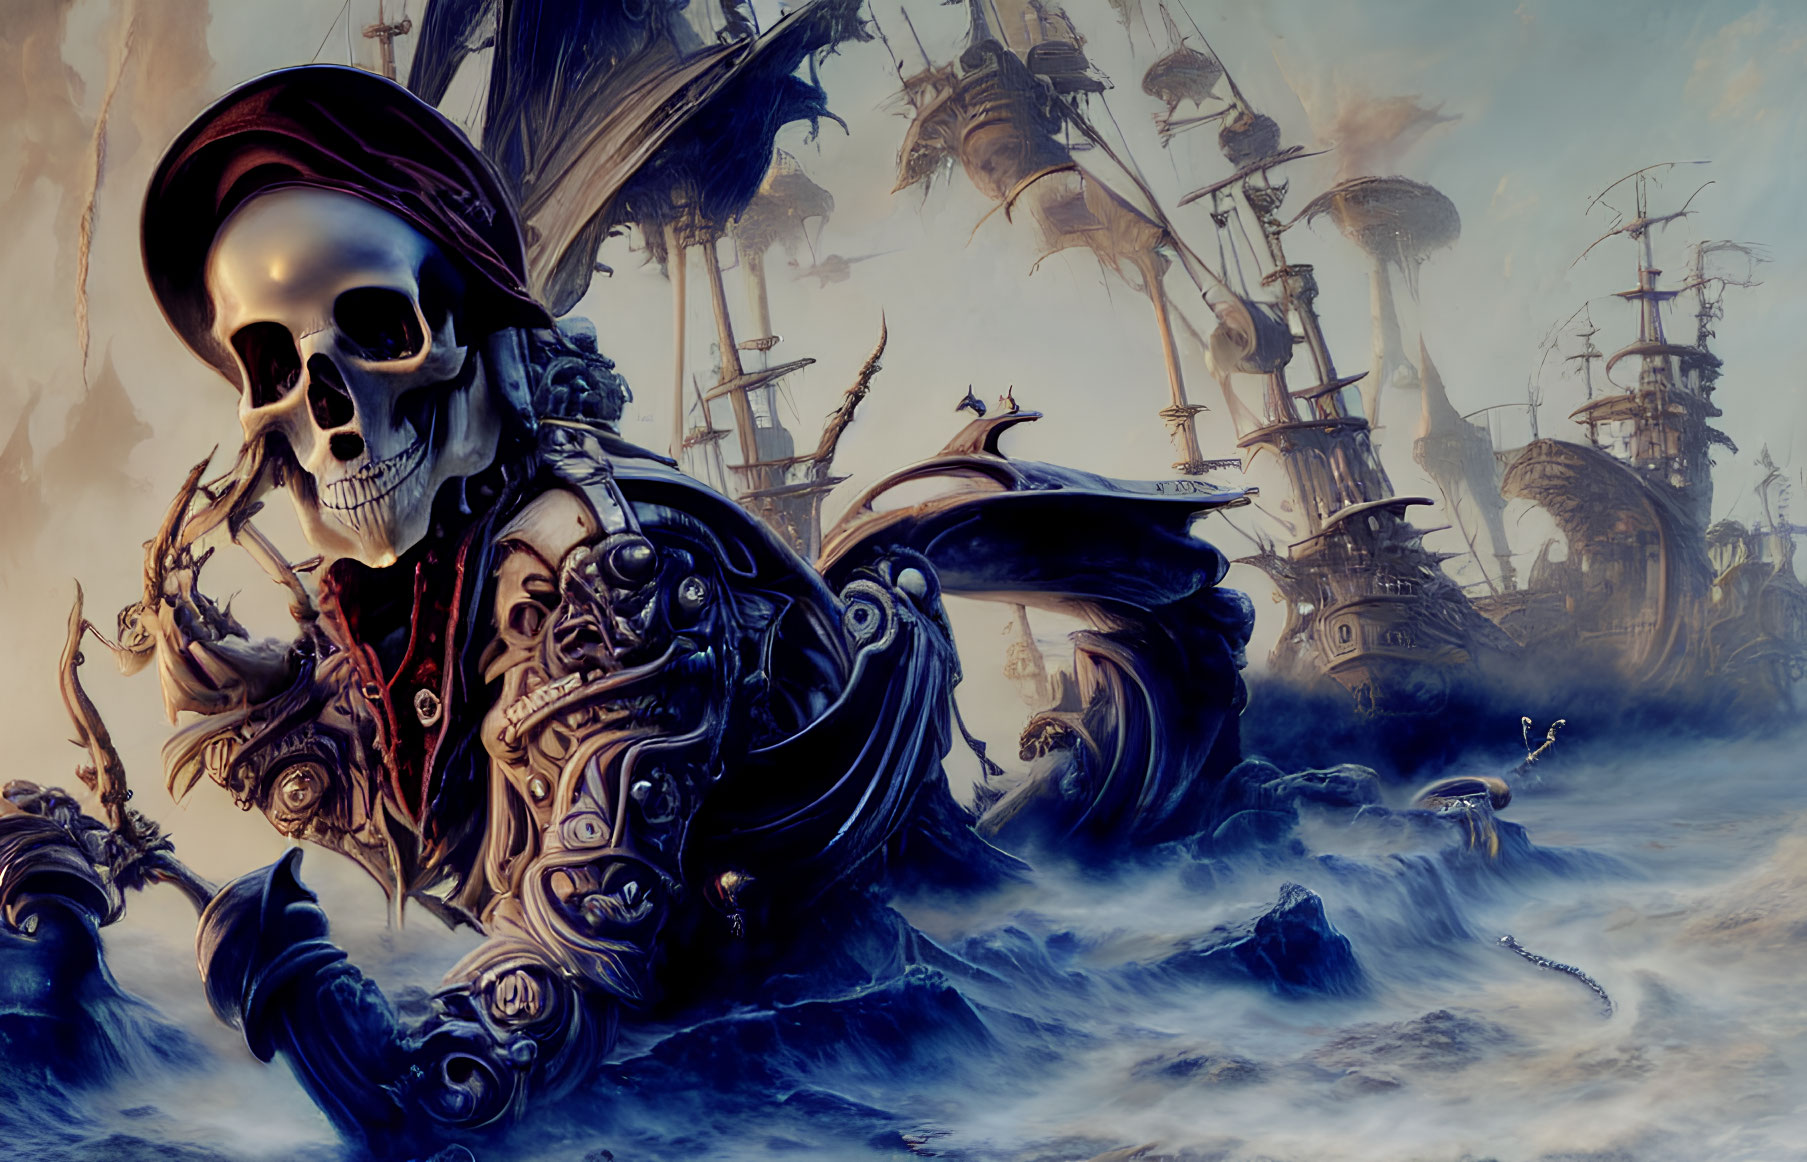 Fantasy Artwork: Skull with Pirate Hat on Ornate Armor, Ships and Sea Background